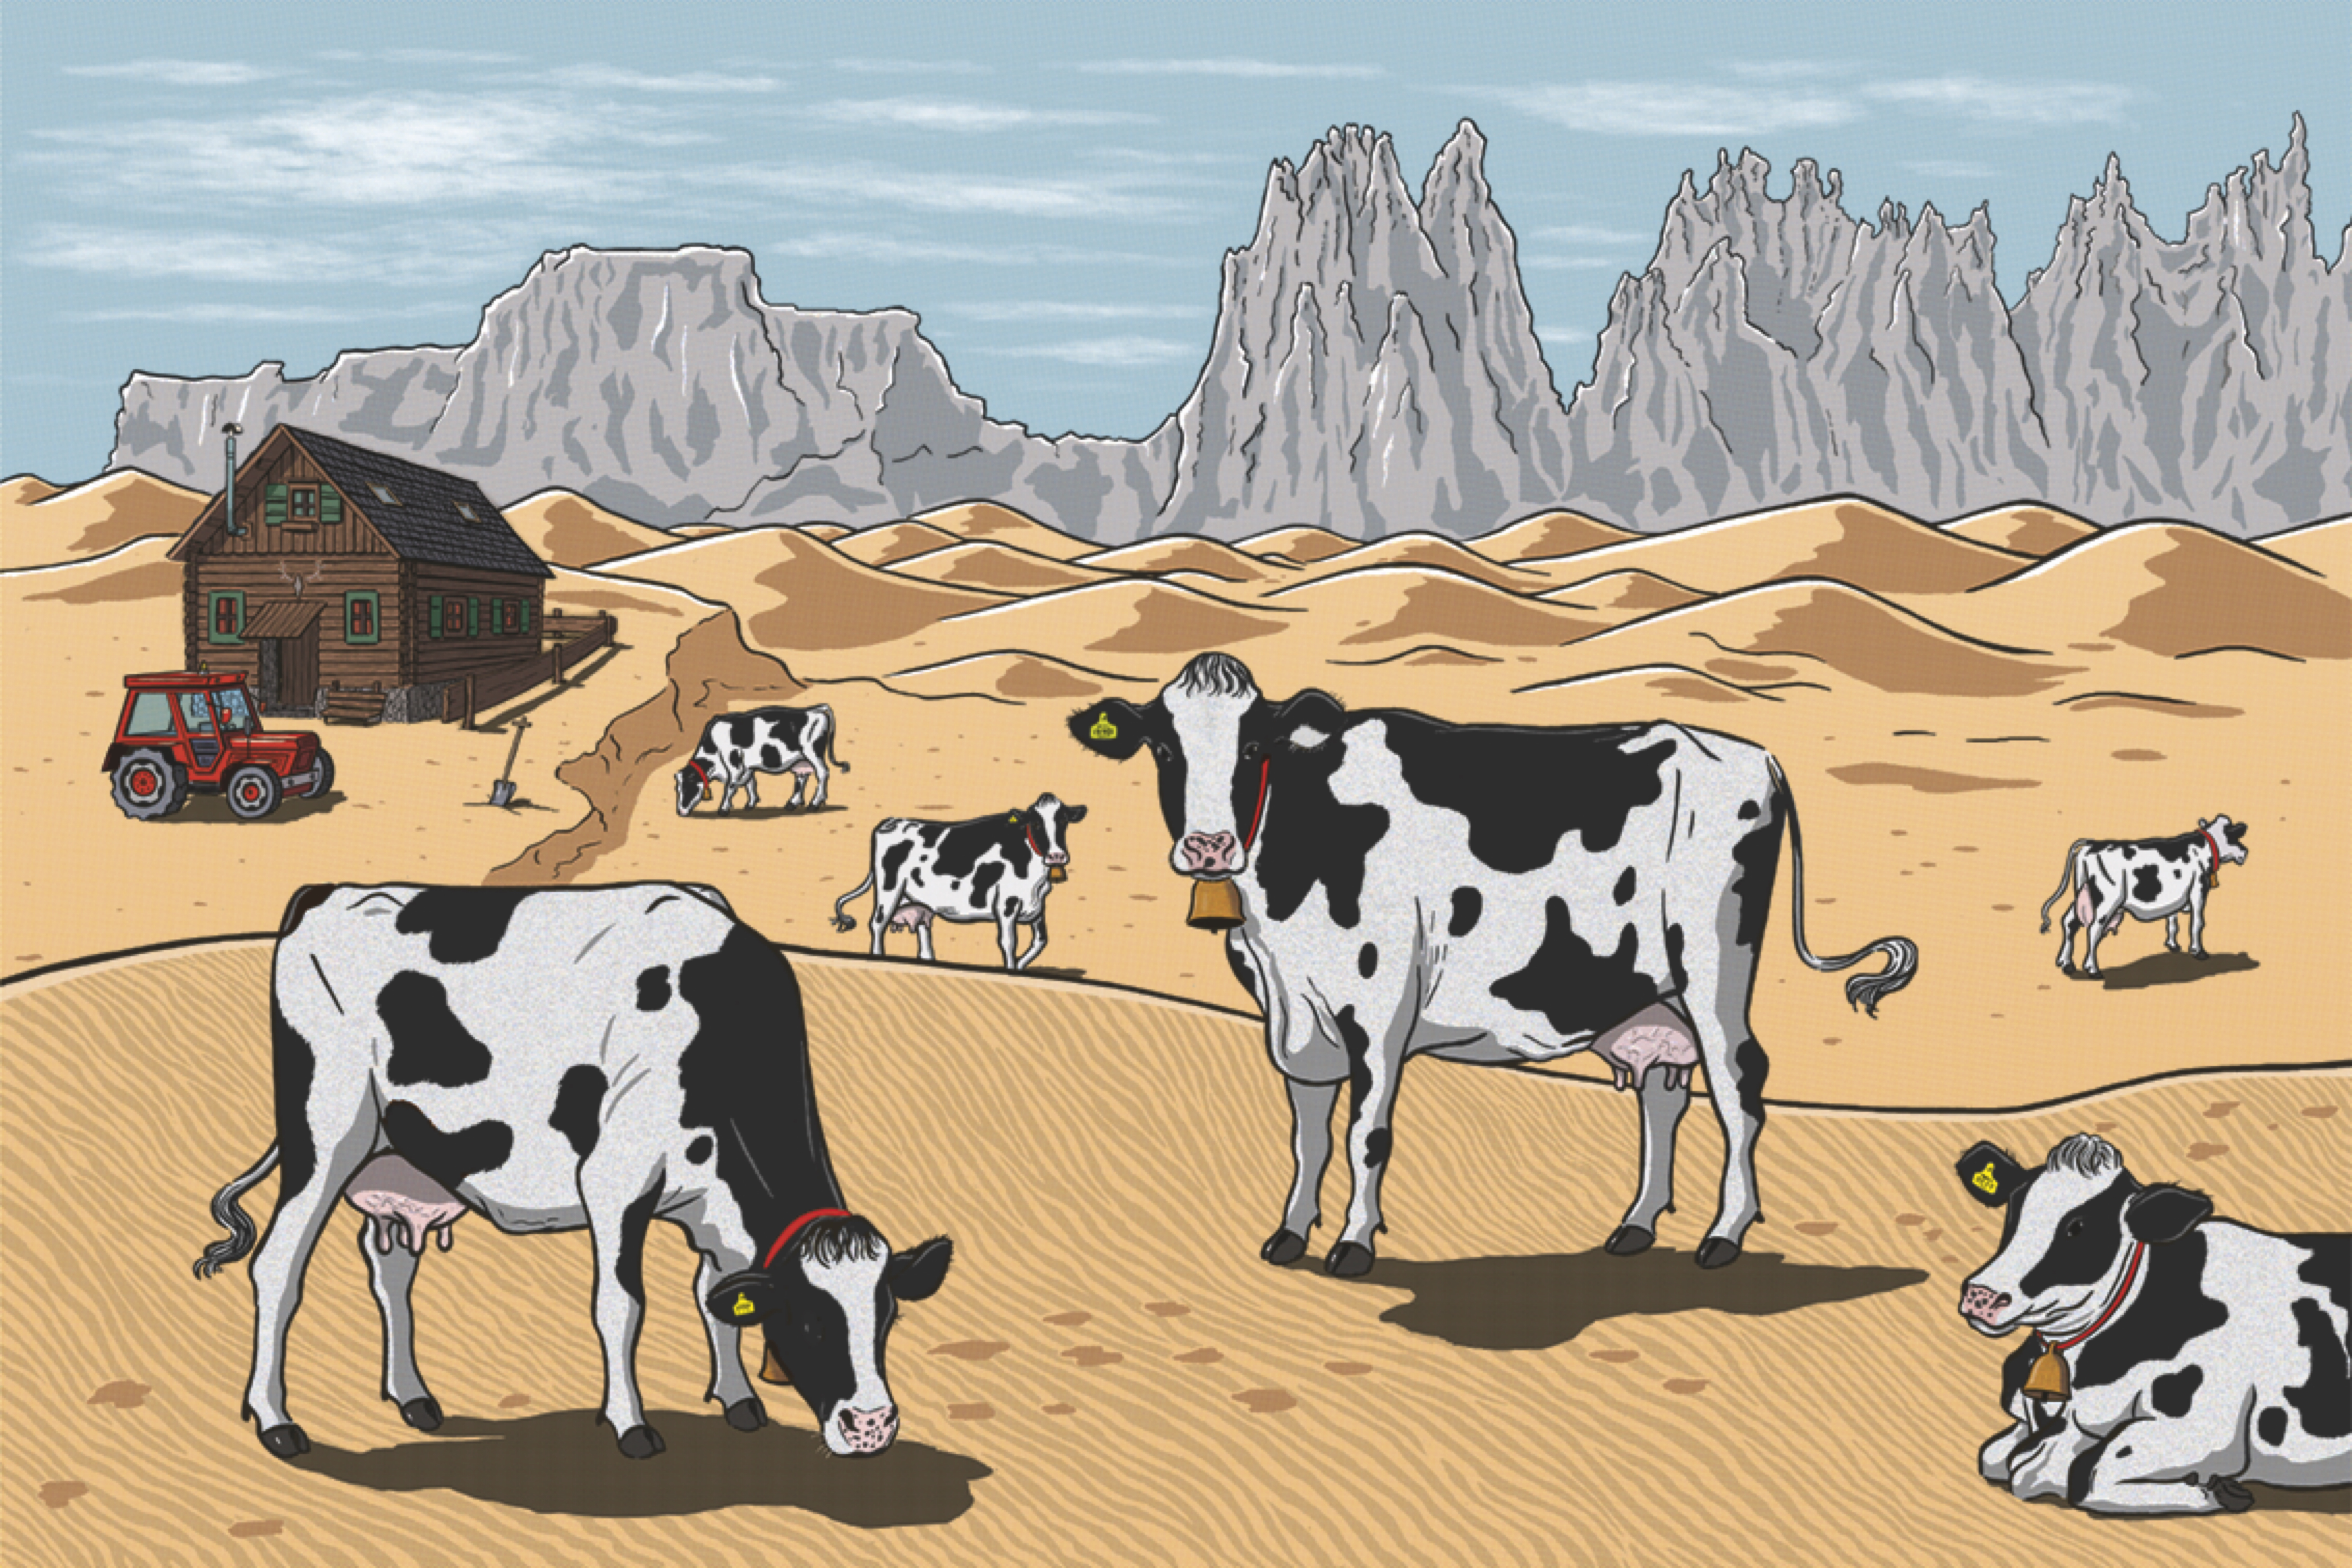 Michaela Konrad, <br>2050 – Pictures Of Tomorrow (Cows in the Desert), <br>Offset-Lithographie, <br>59,8 × 89,9 cm, 2019